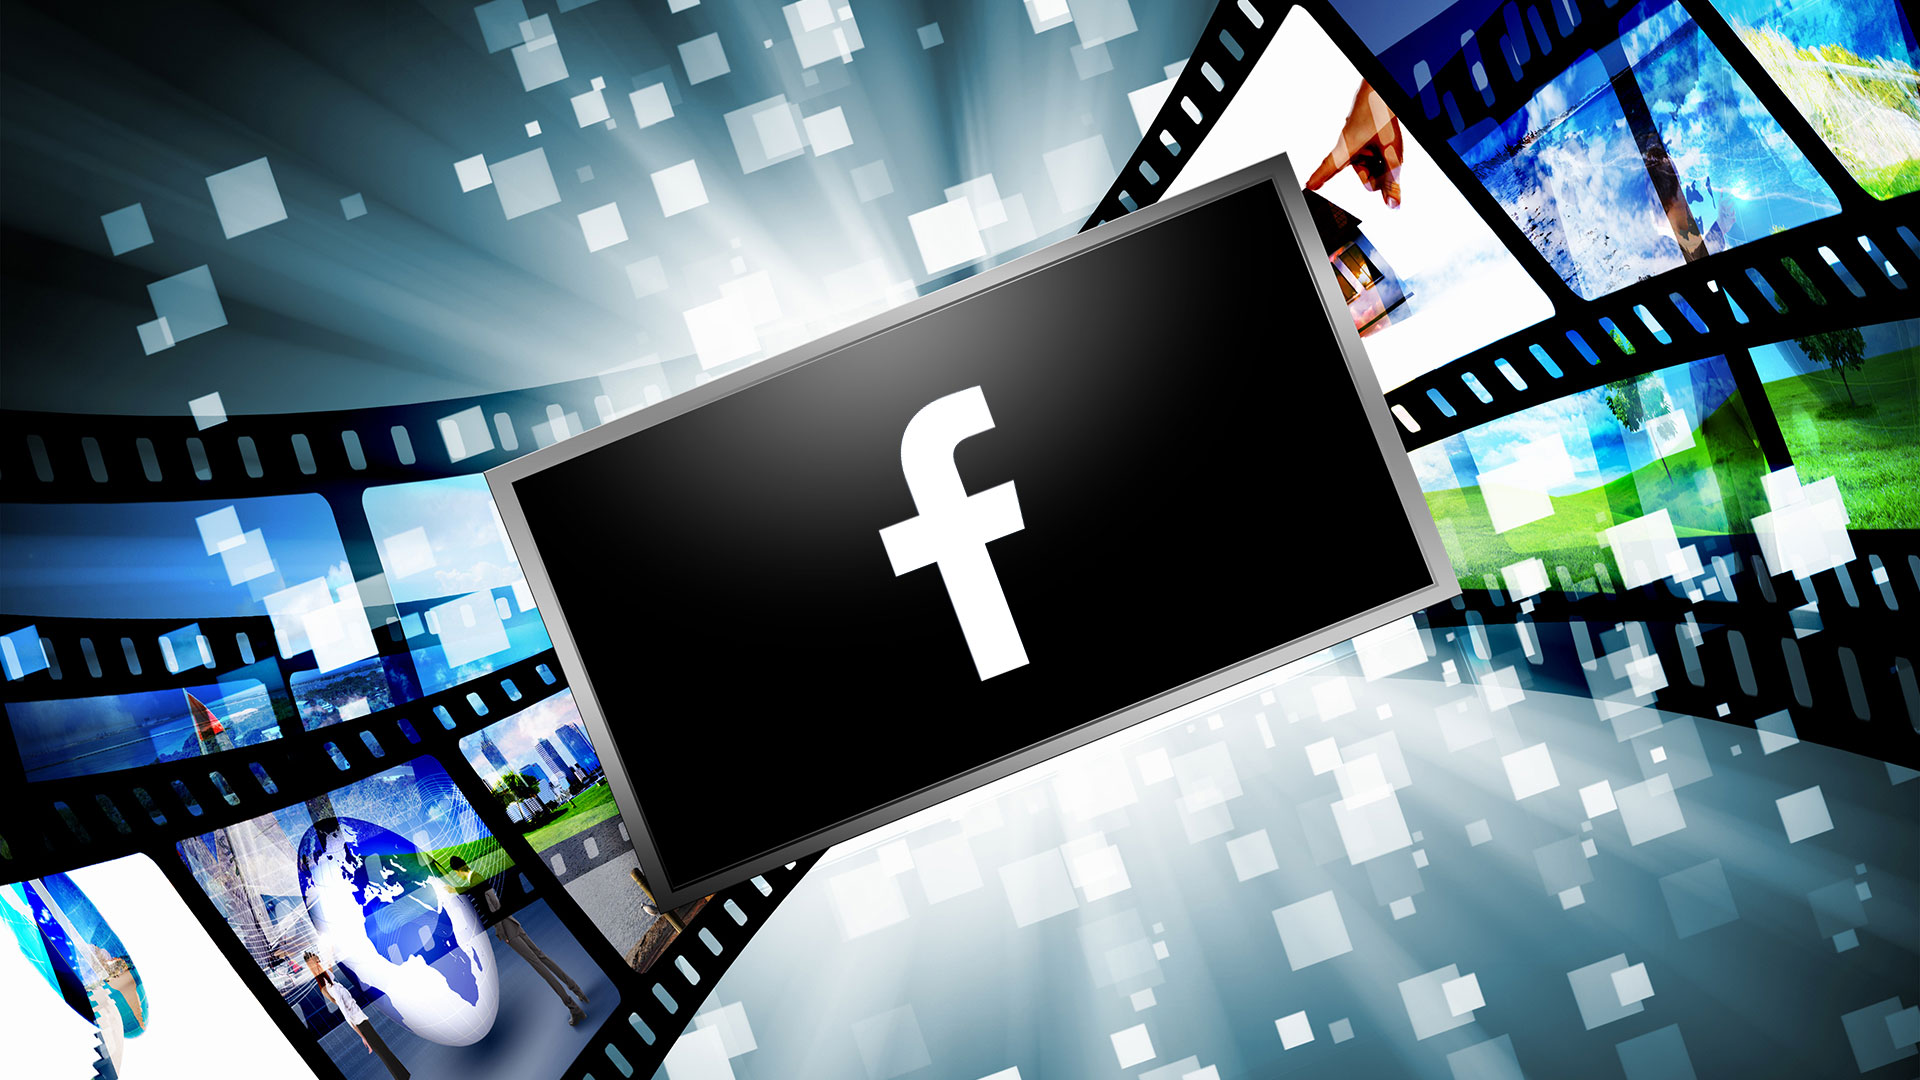 Facebook will try selling ads on TV screens